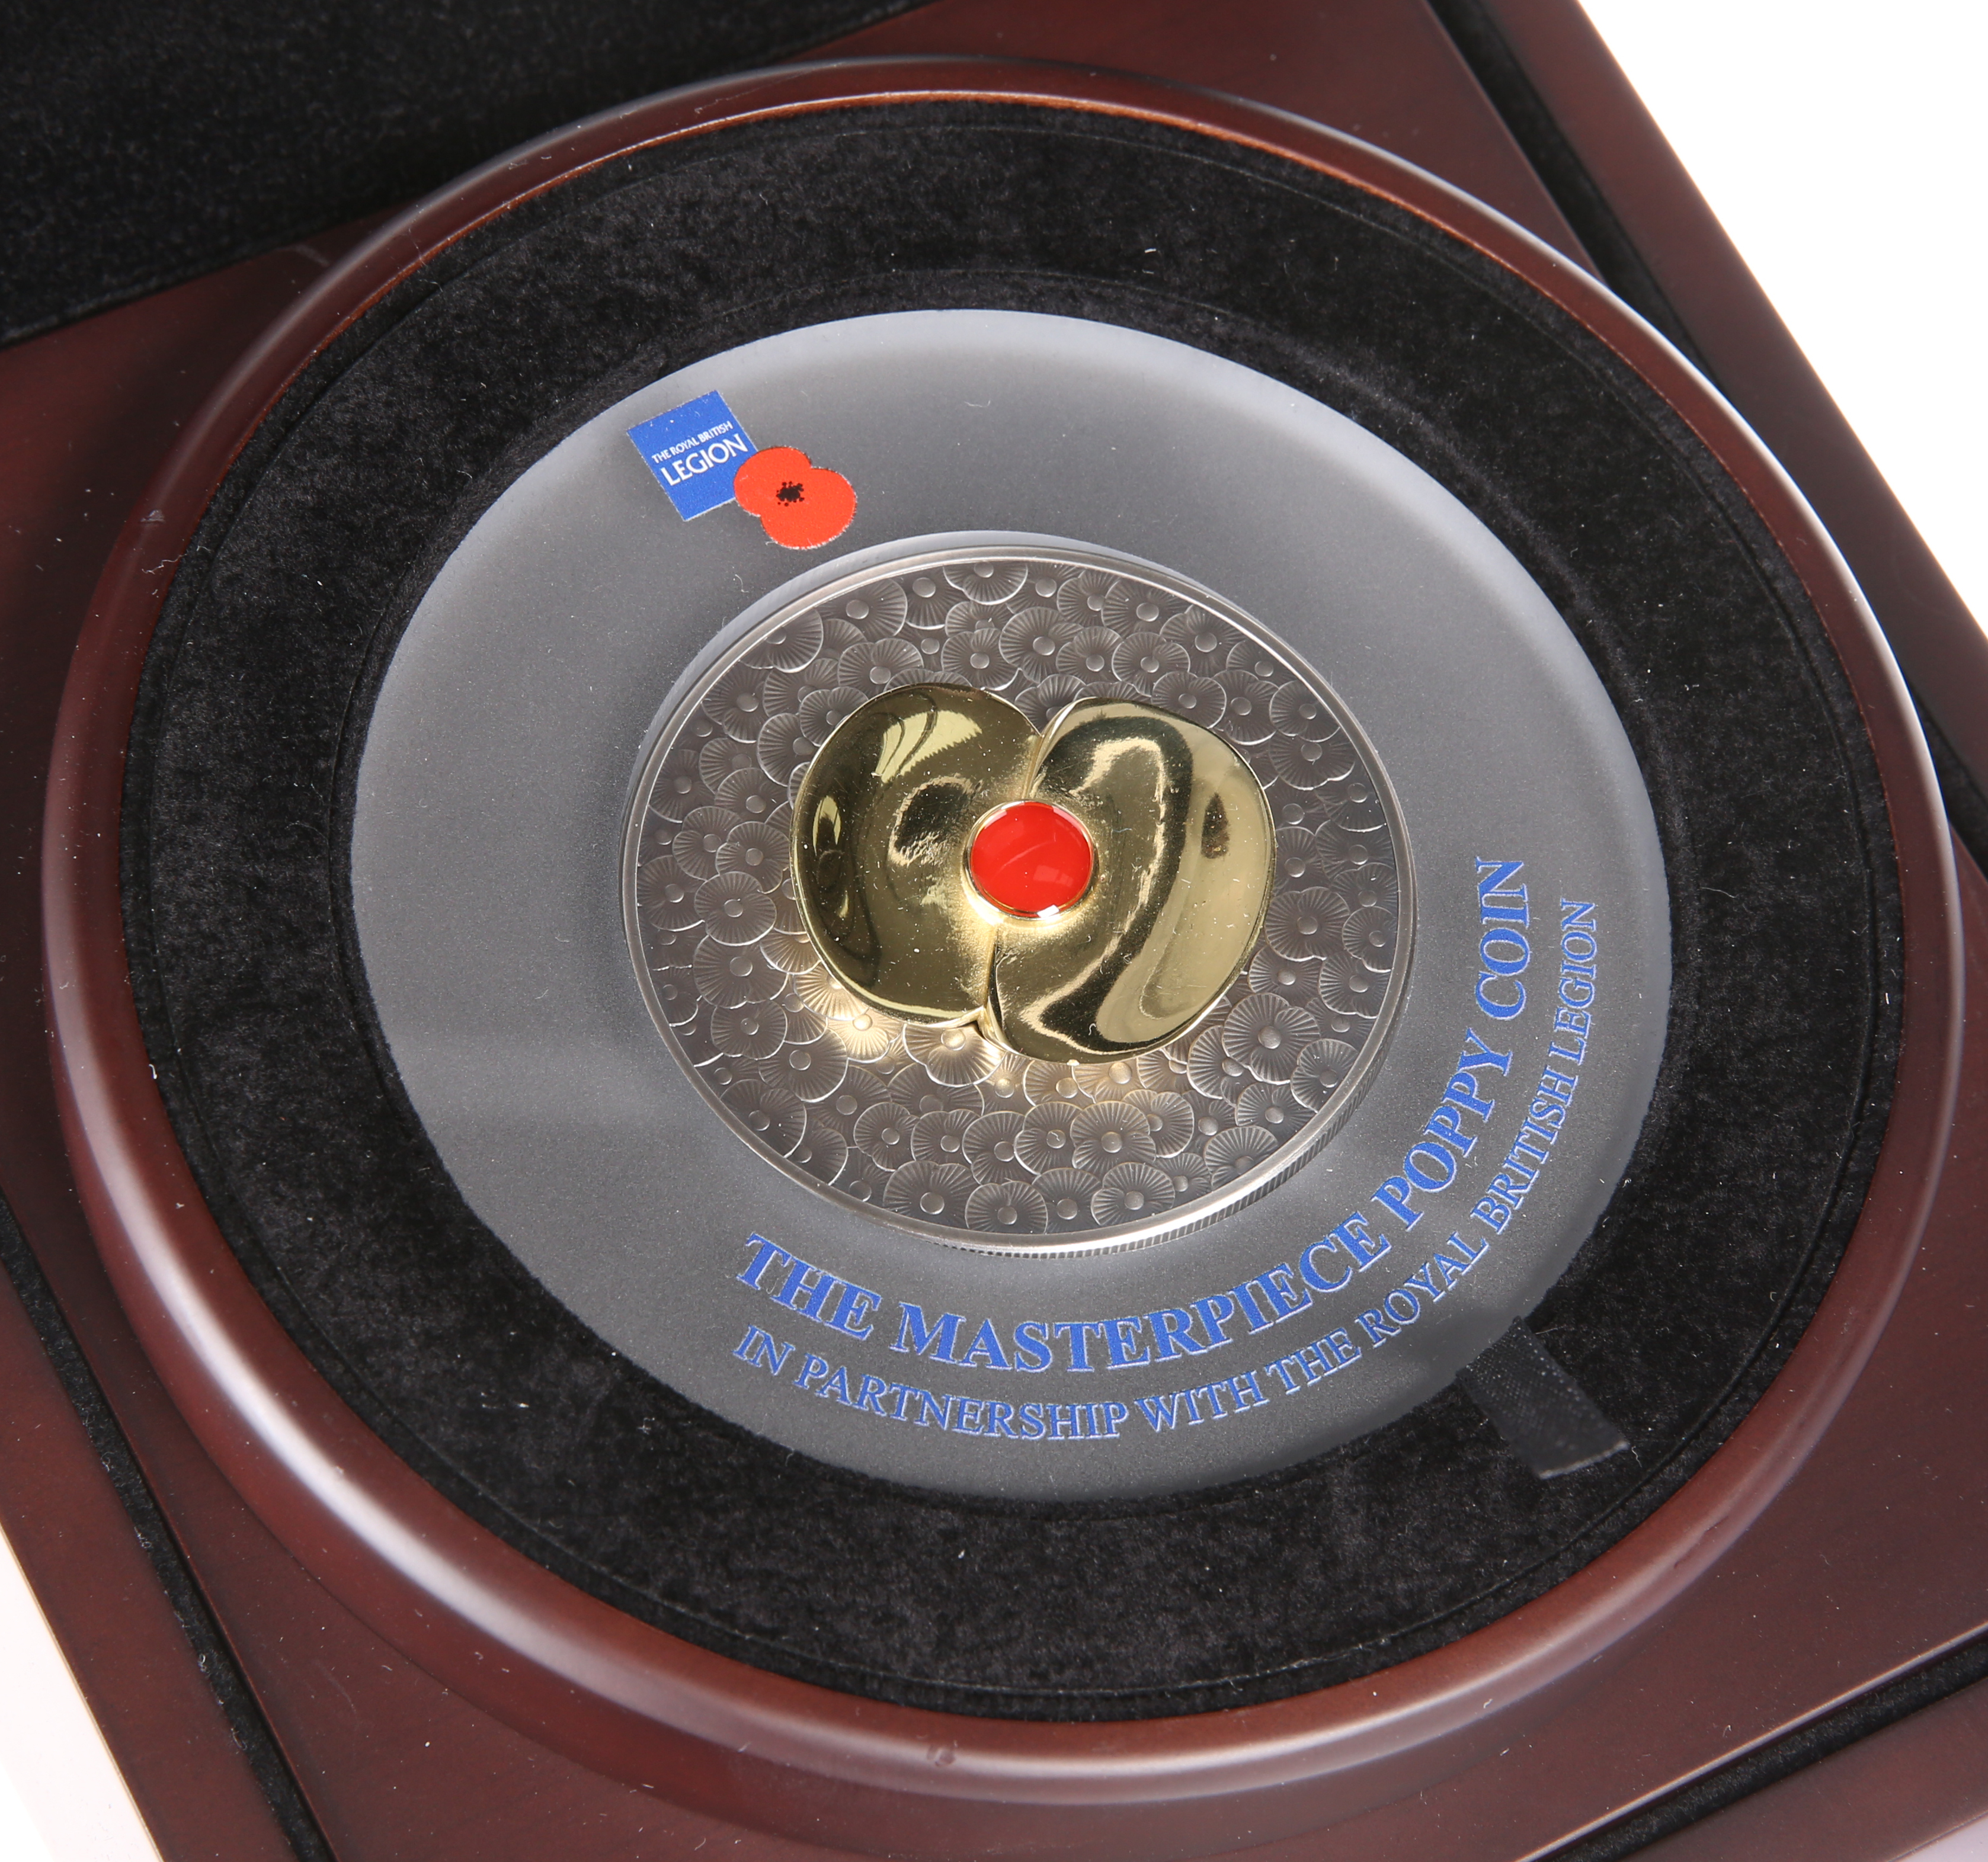 A WESTMINSTER LIMITED EDITION TEN POUND SILVER PROOF, "MASTERPIECE POPPY COIN", Jersey, from an